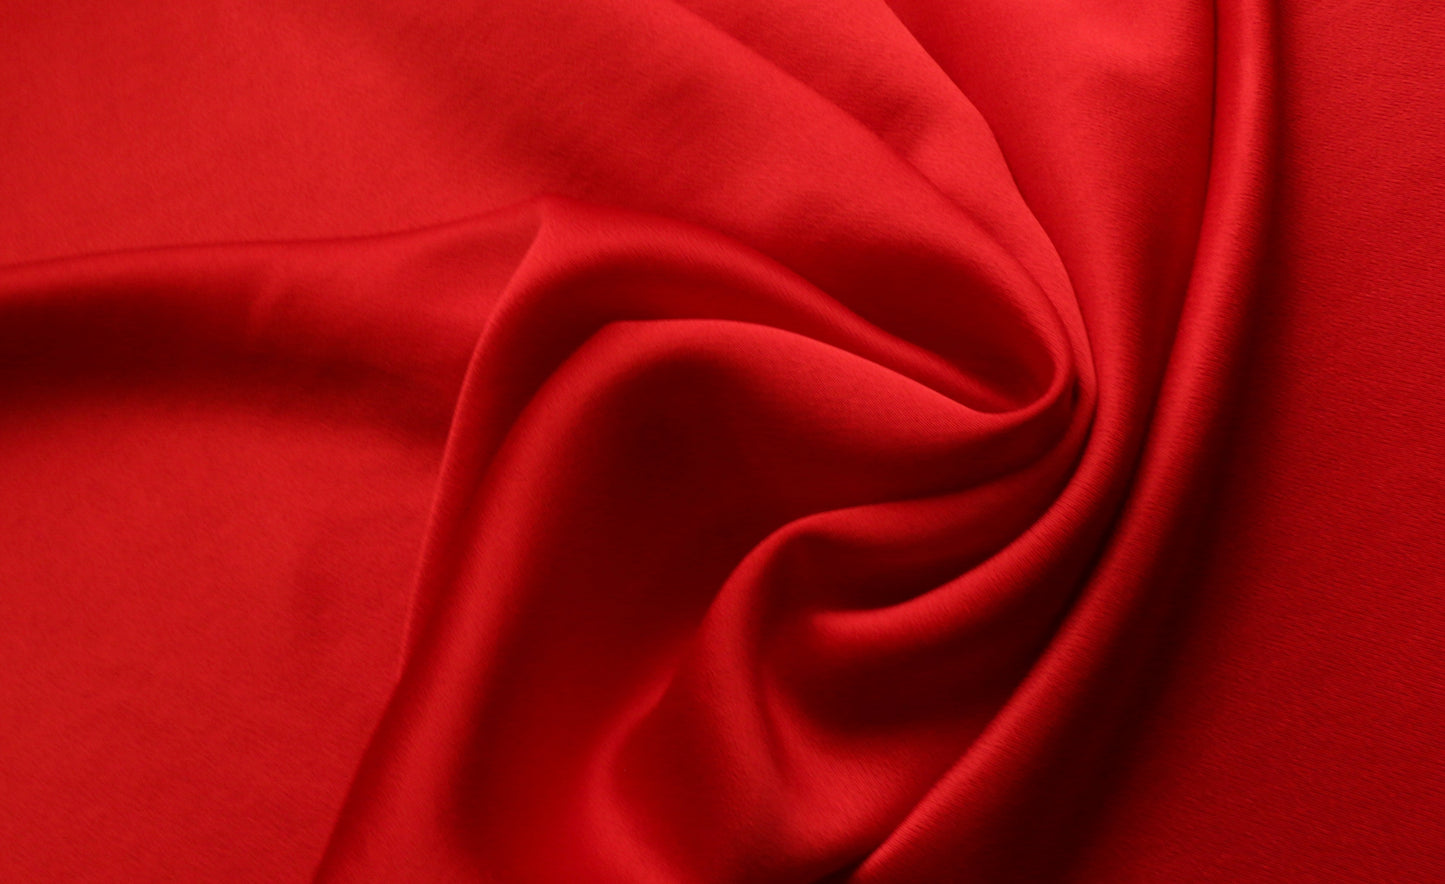 REMNANT 0.80m x 1.46m - SATIN FABRIC - Red colour